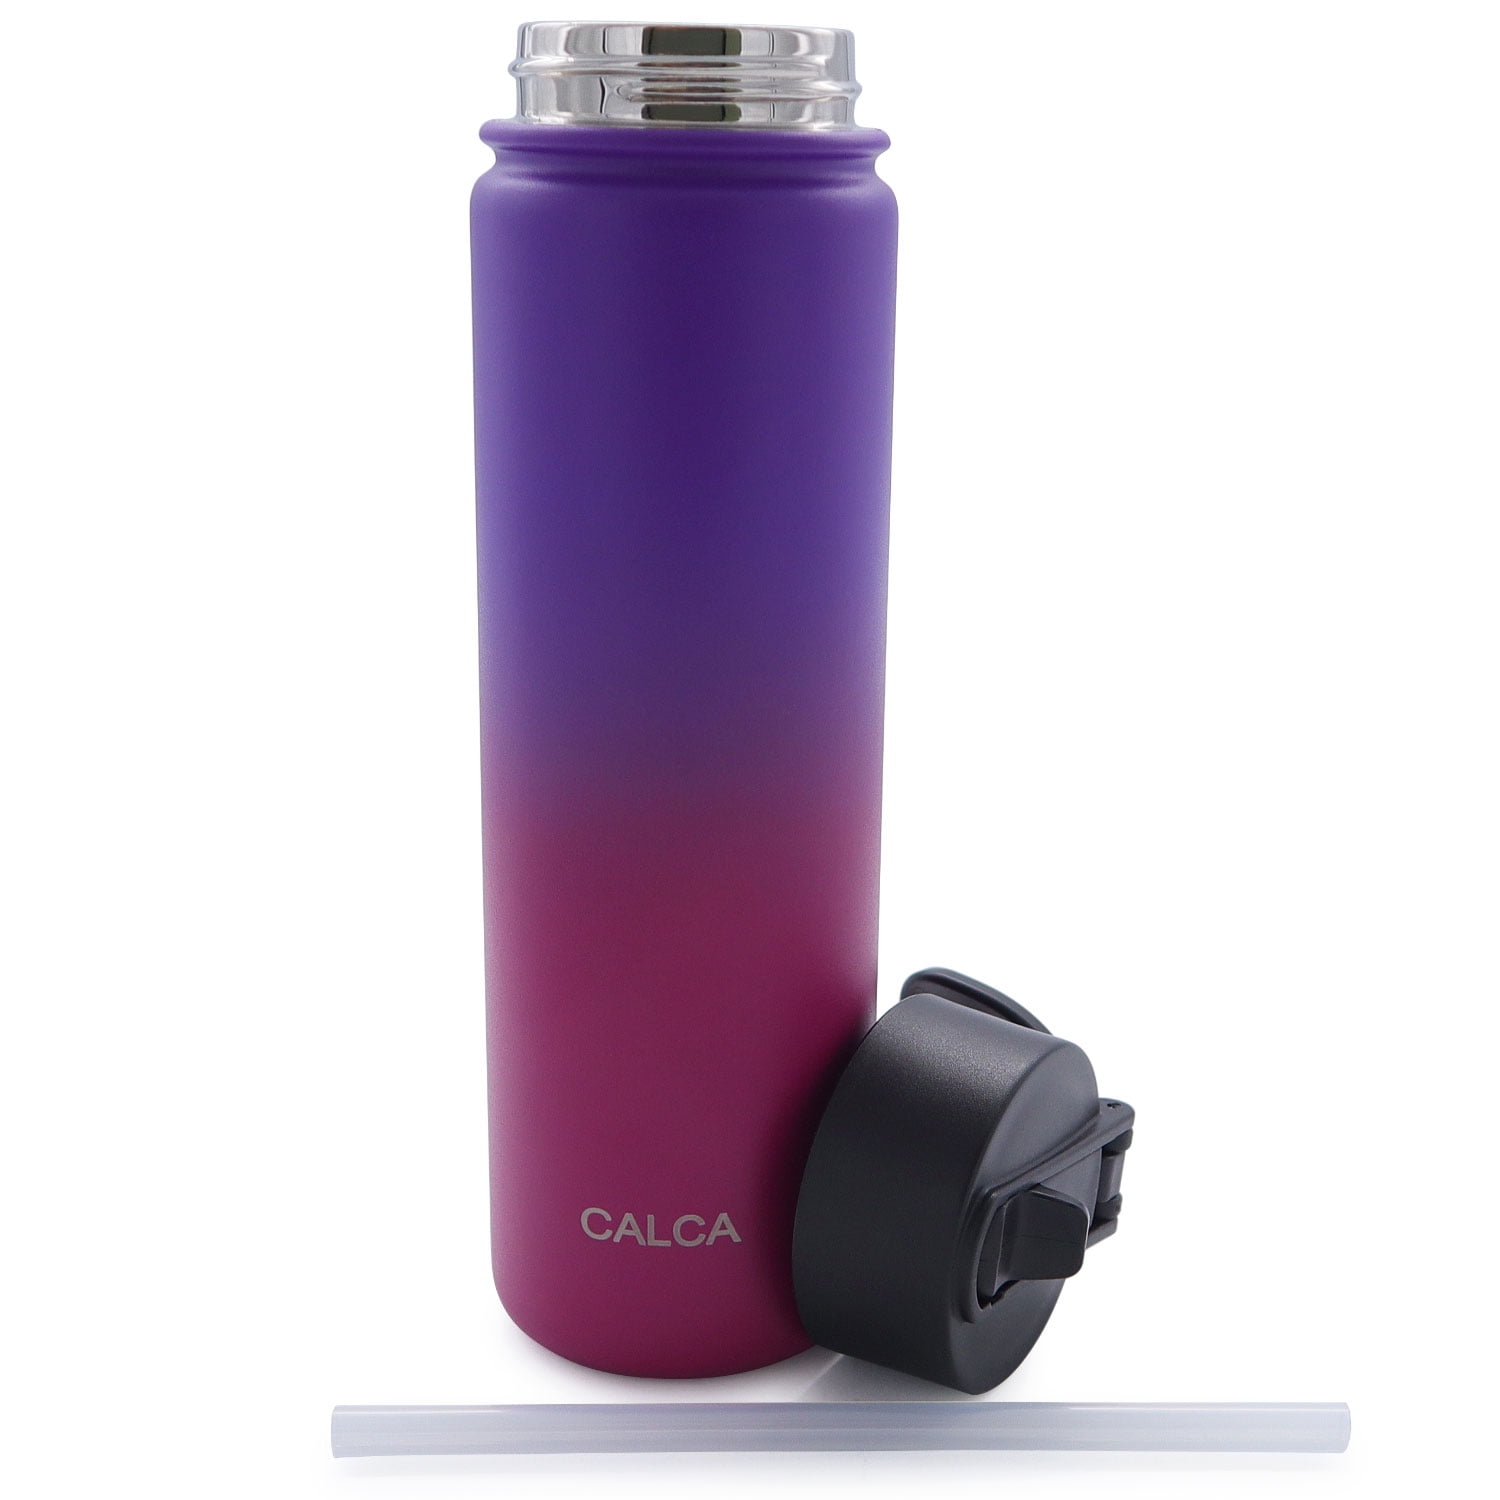 22oz CALCA Water Bottle Travel Cup Gift for Friends, Mom, Girls, Teens,  Wife